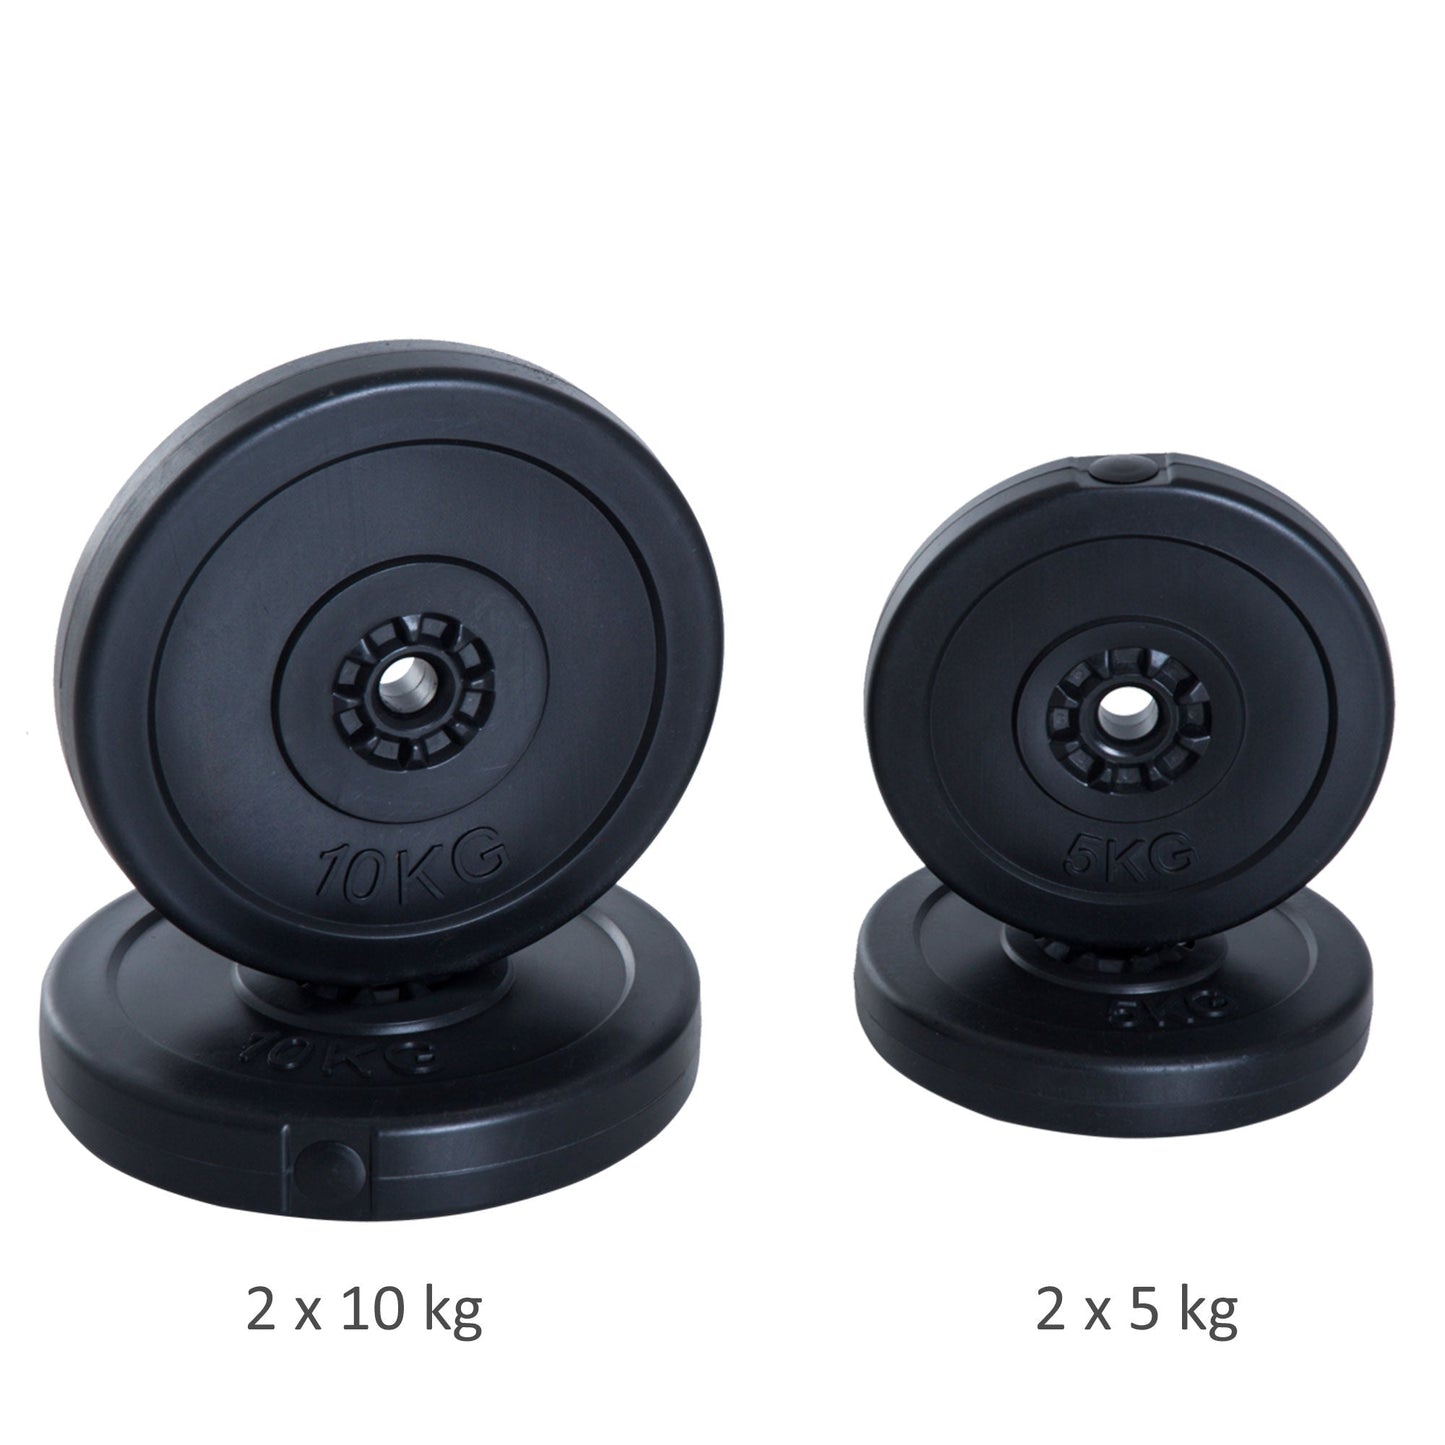 HOMCOM 4pc Durable Gym Barbell Plates W/ 1 inch Holes Weight Dumbbell Set for Exercise Fitting Gym Body Workout Disc Weight Plate Set 2 x 5kg & 2 x 10kg Black